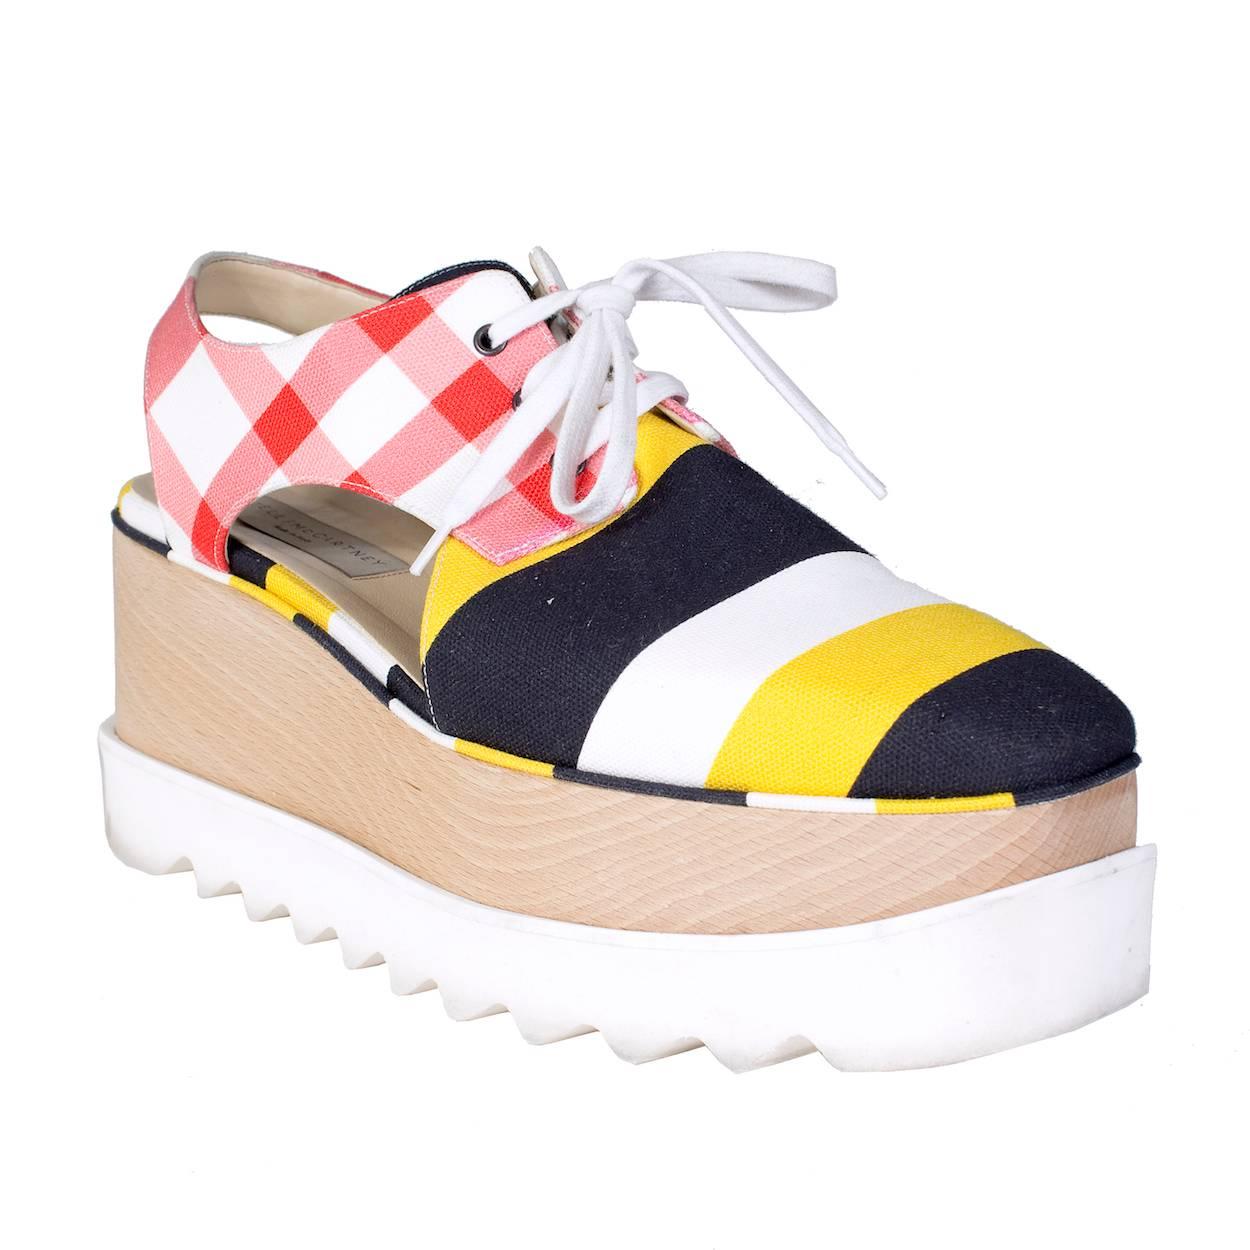 Sneakers by Stella McCartney.  Multi pattern canvas design with cutouts and rubber ridged soles. 

Size 40
2